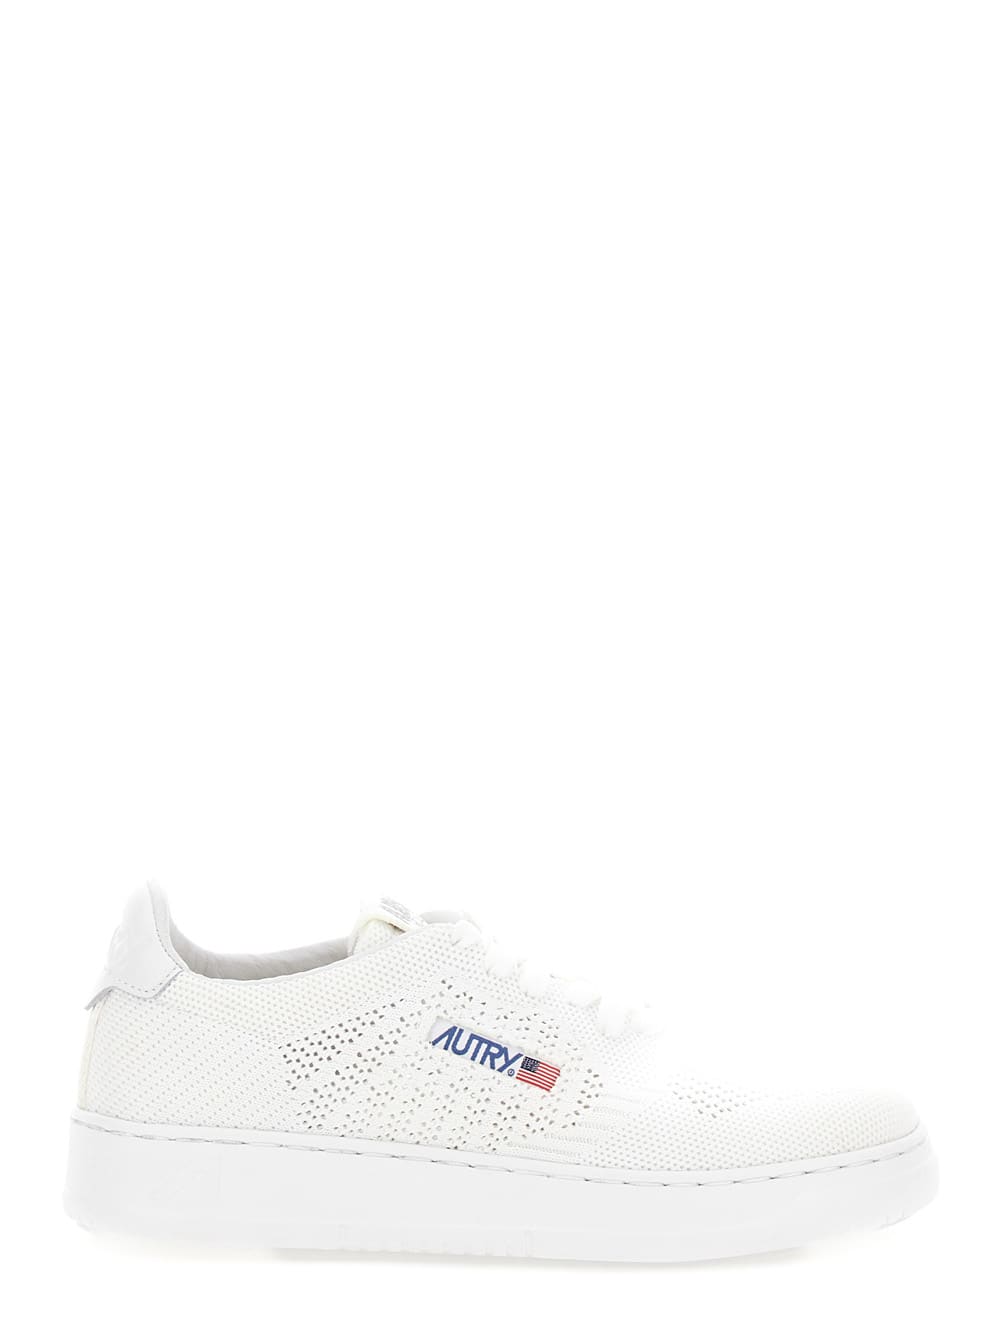 Easeknit Low Wom, Knit/leat White